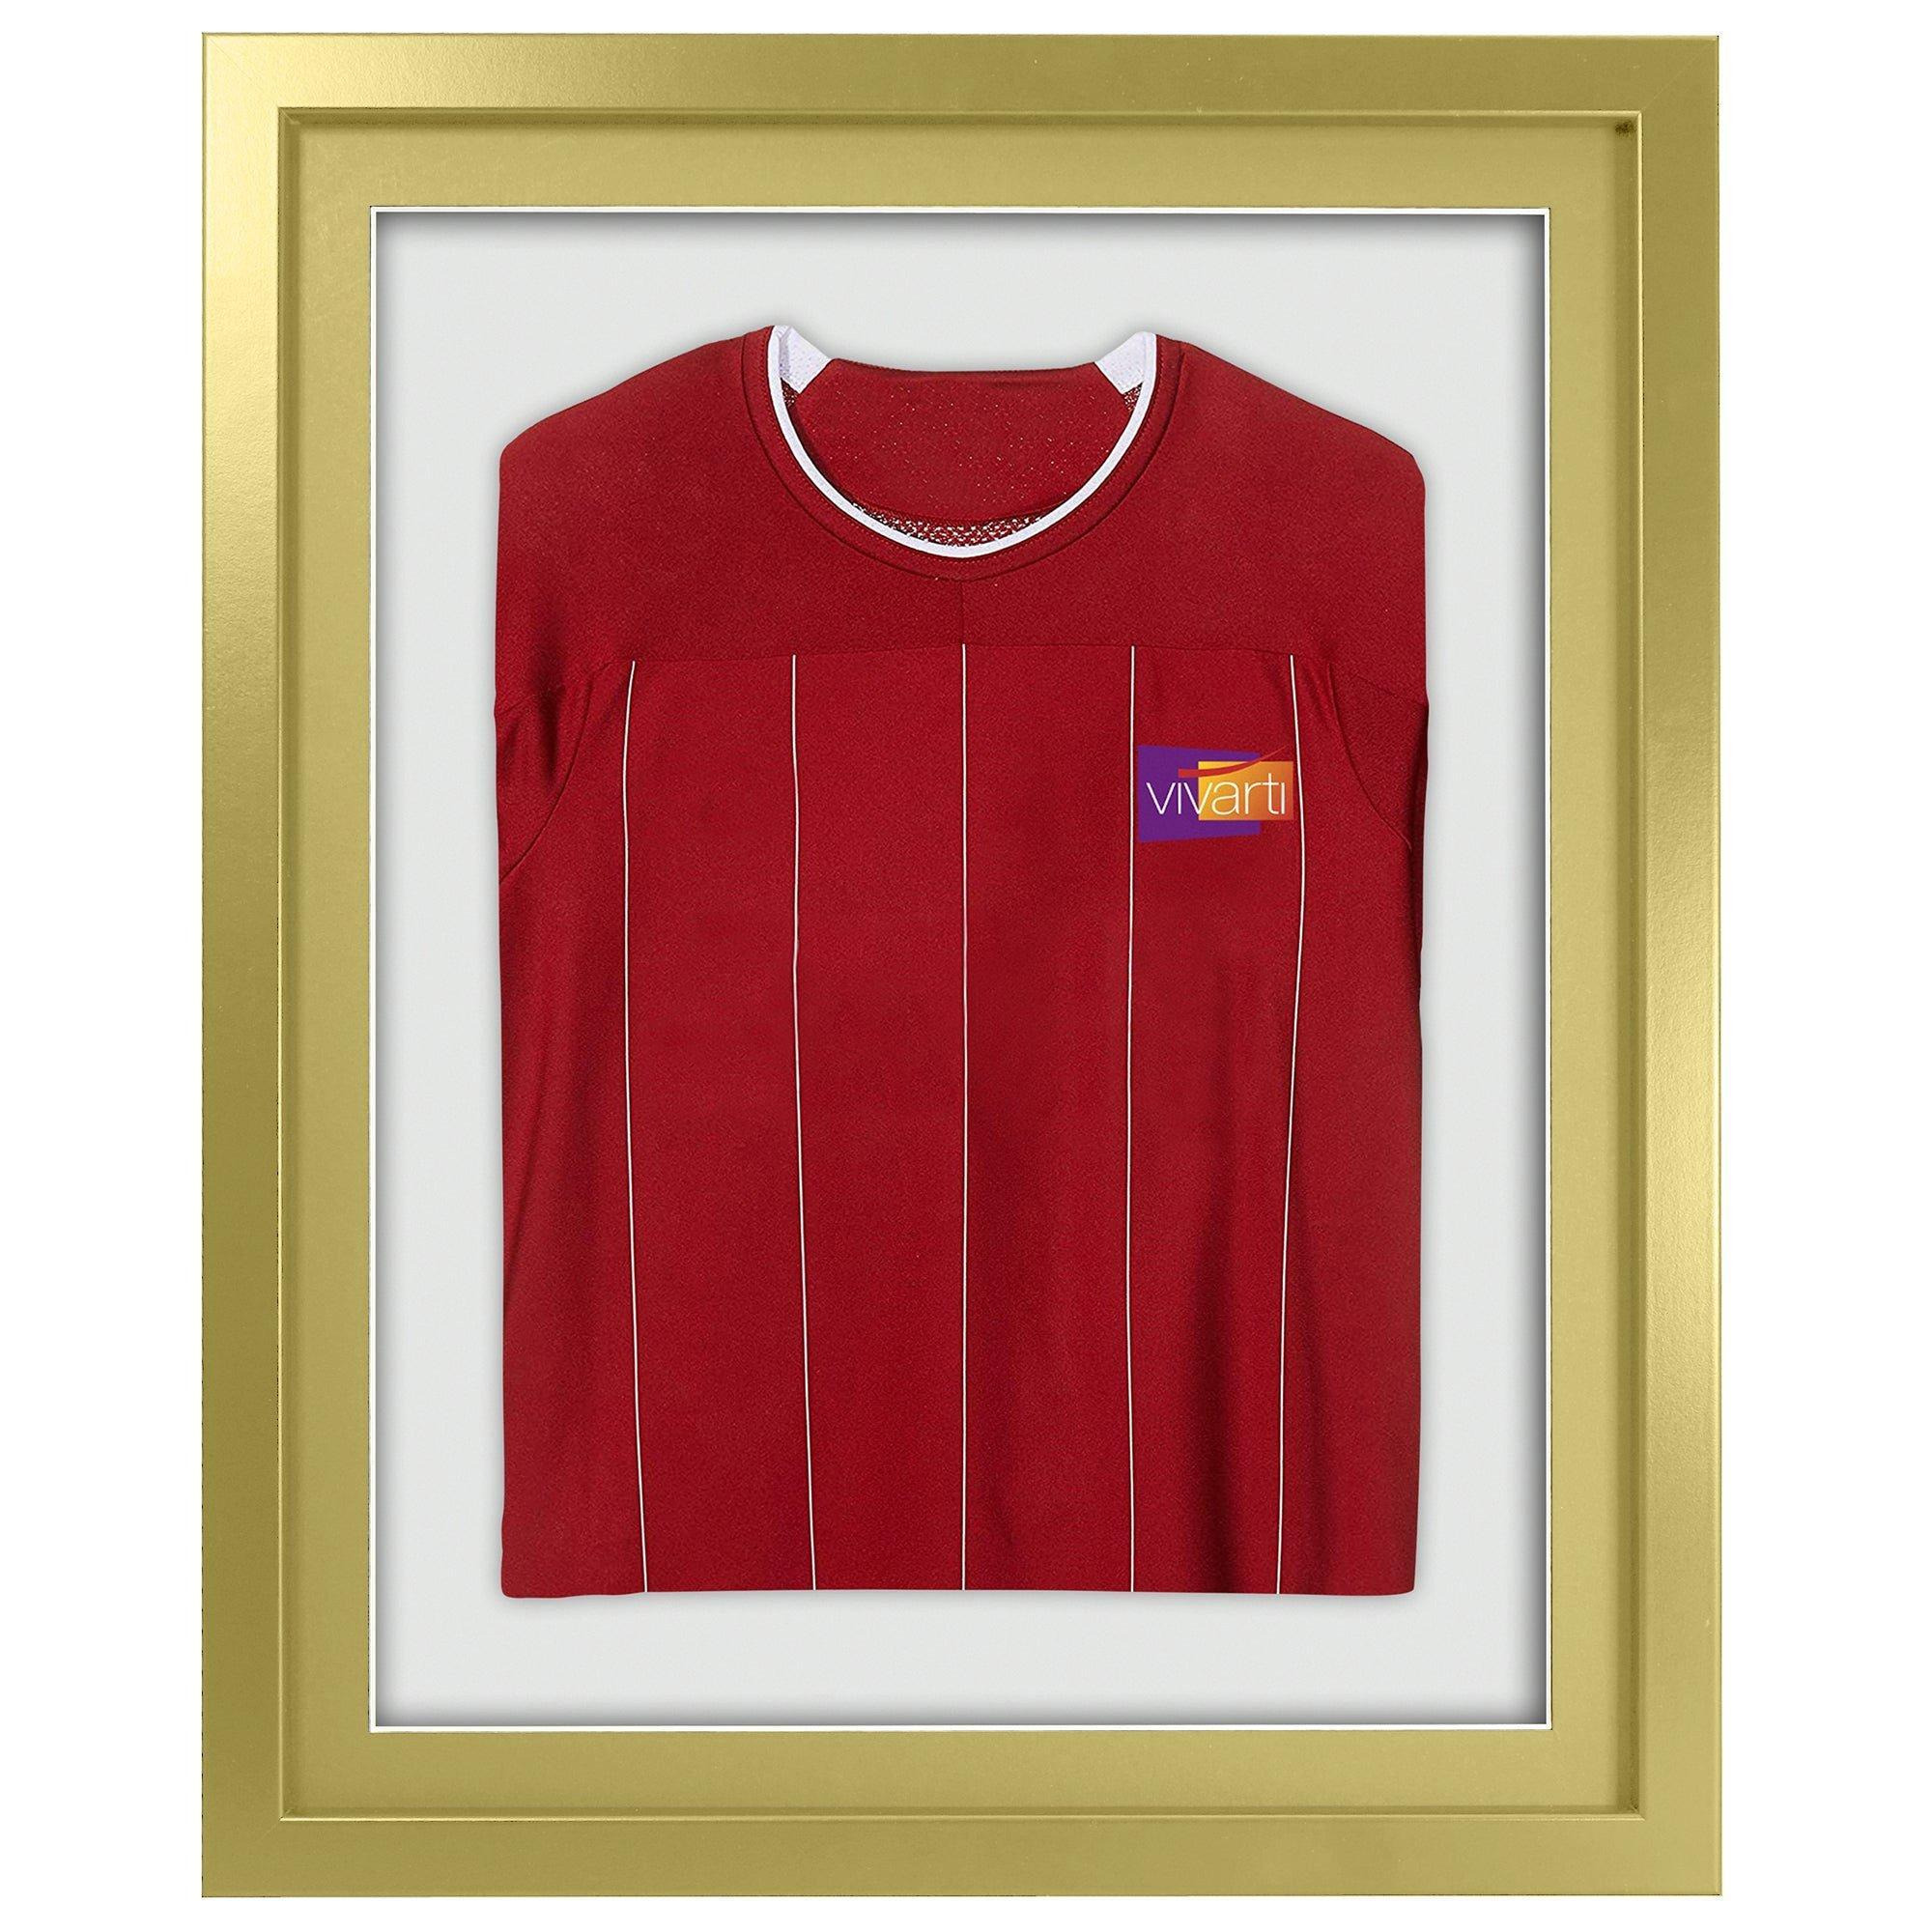 3D Mounted Sports Shirt Display Frame with Gold  Frame and Gold Mount  40 x 50cm - image 1